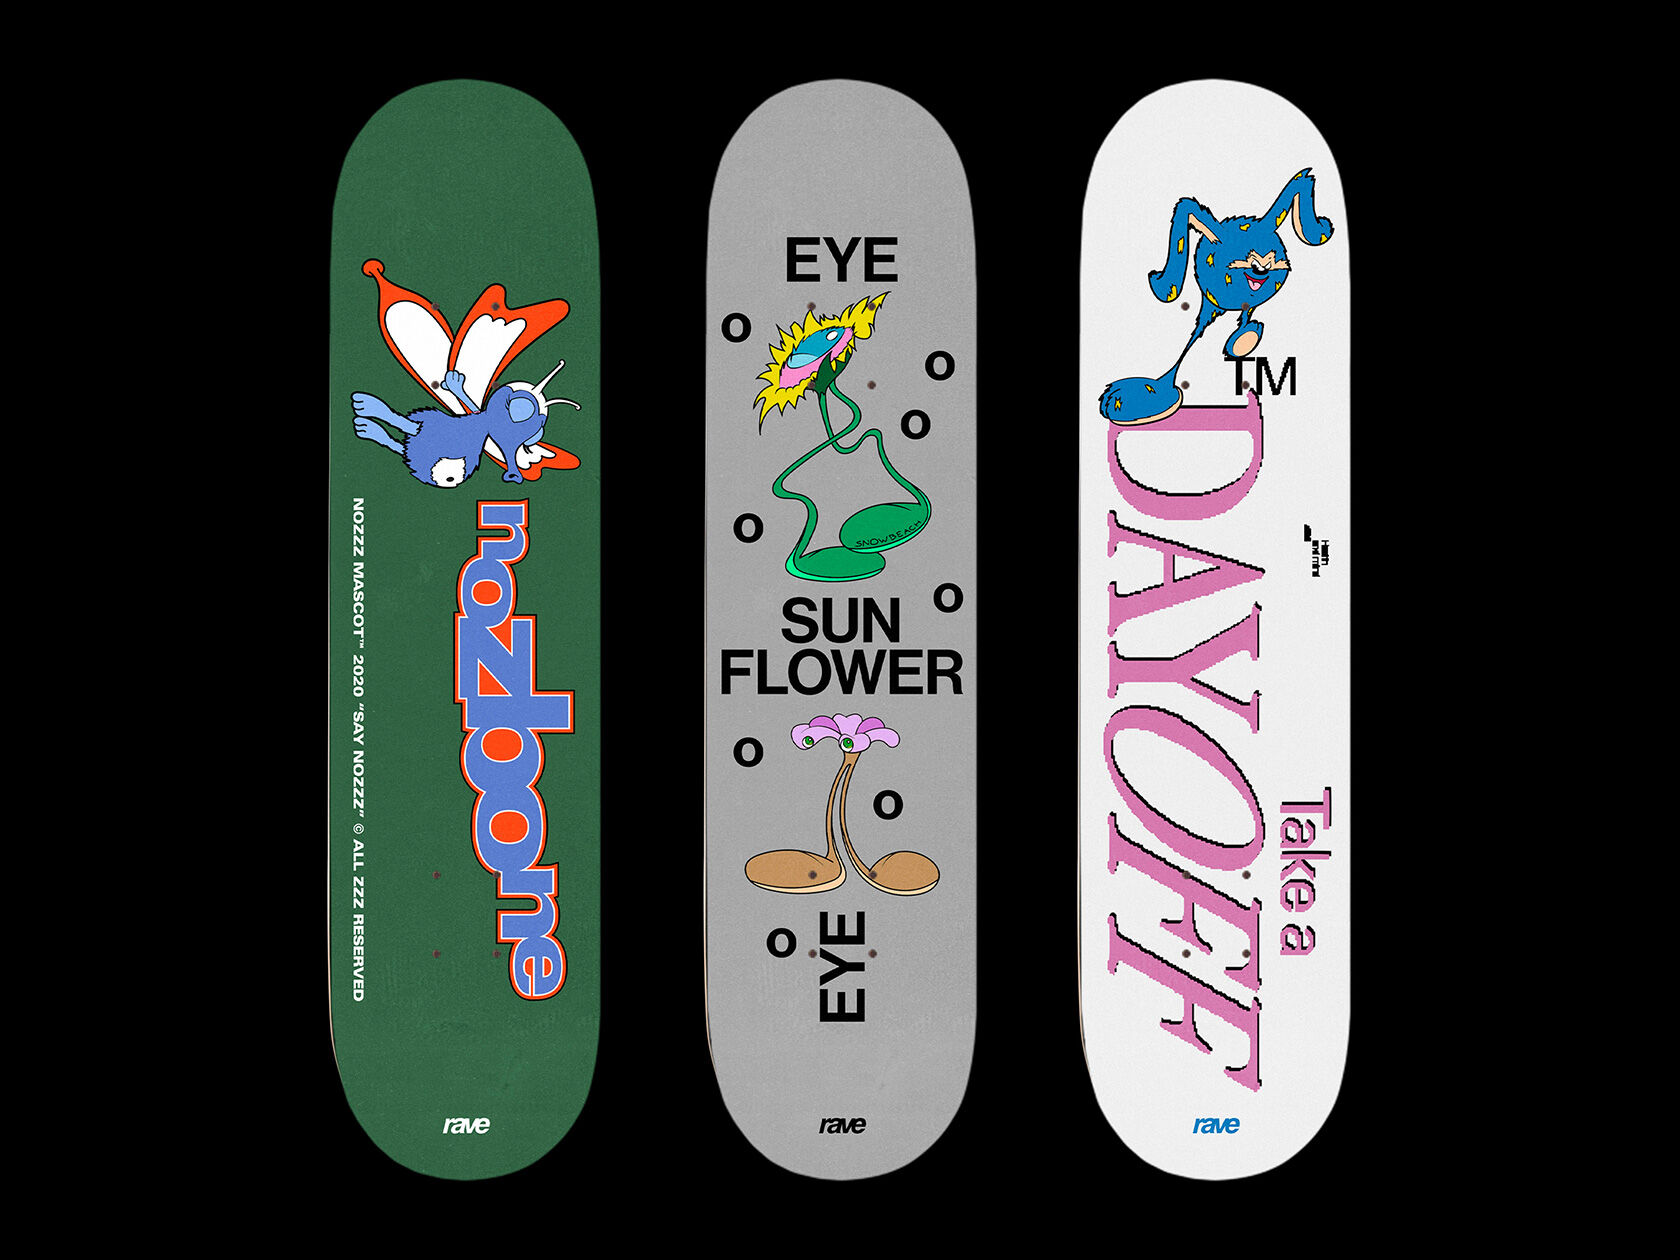 Camille Bourdon and Arthur Nabi’s deck designs celebrate the playfulness and funkiness of skateboard culture